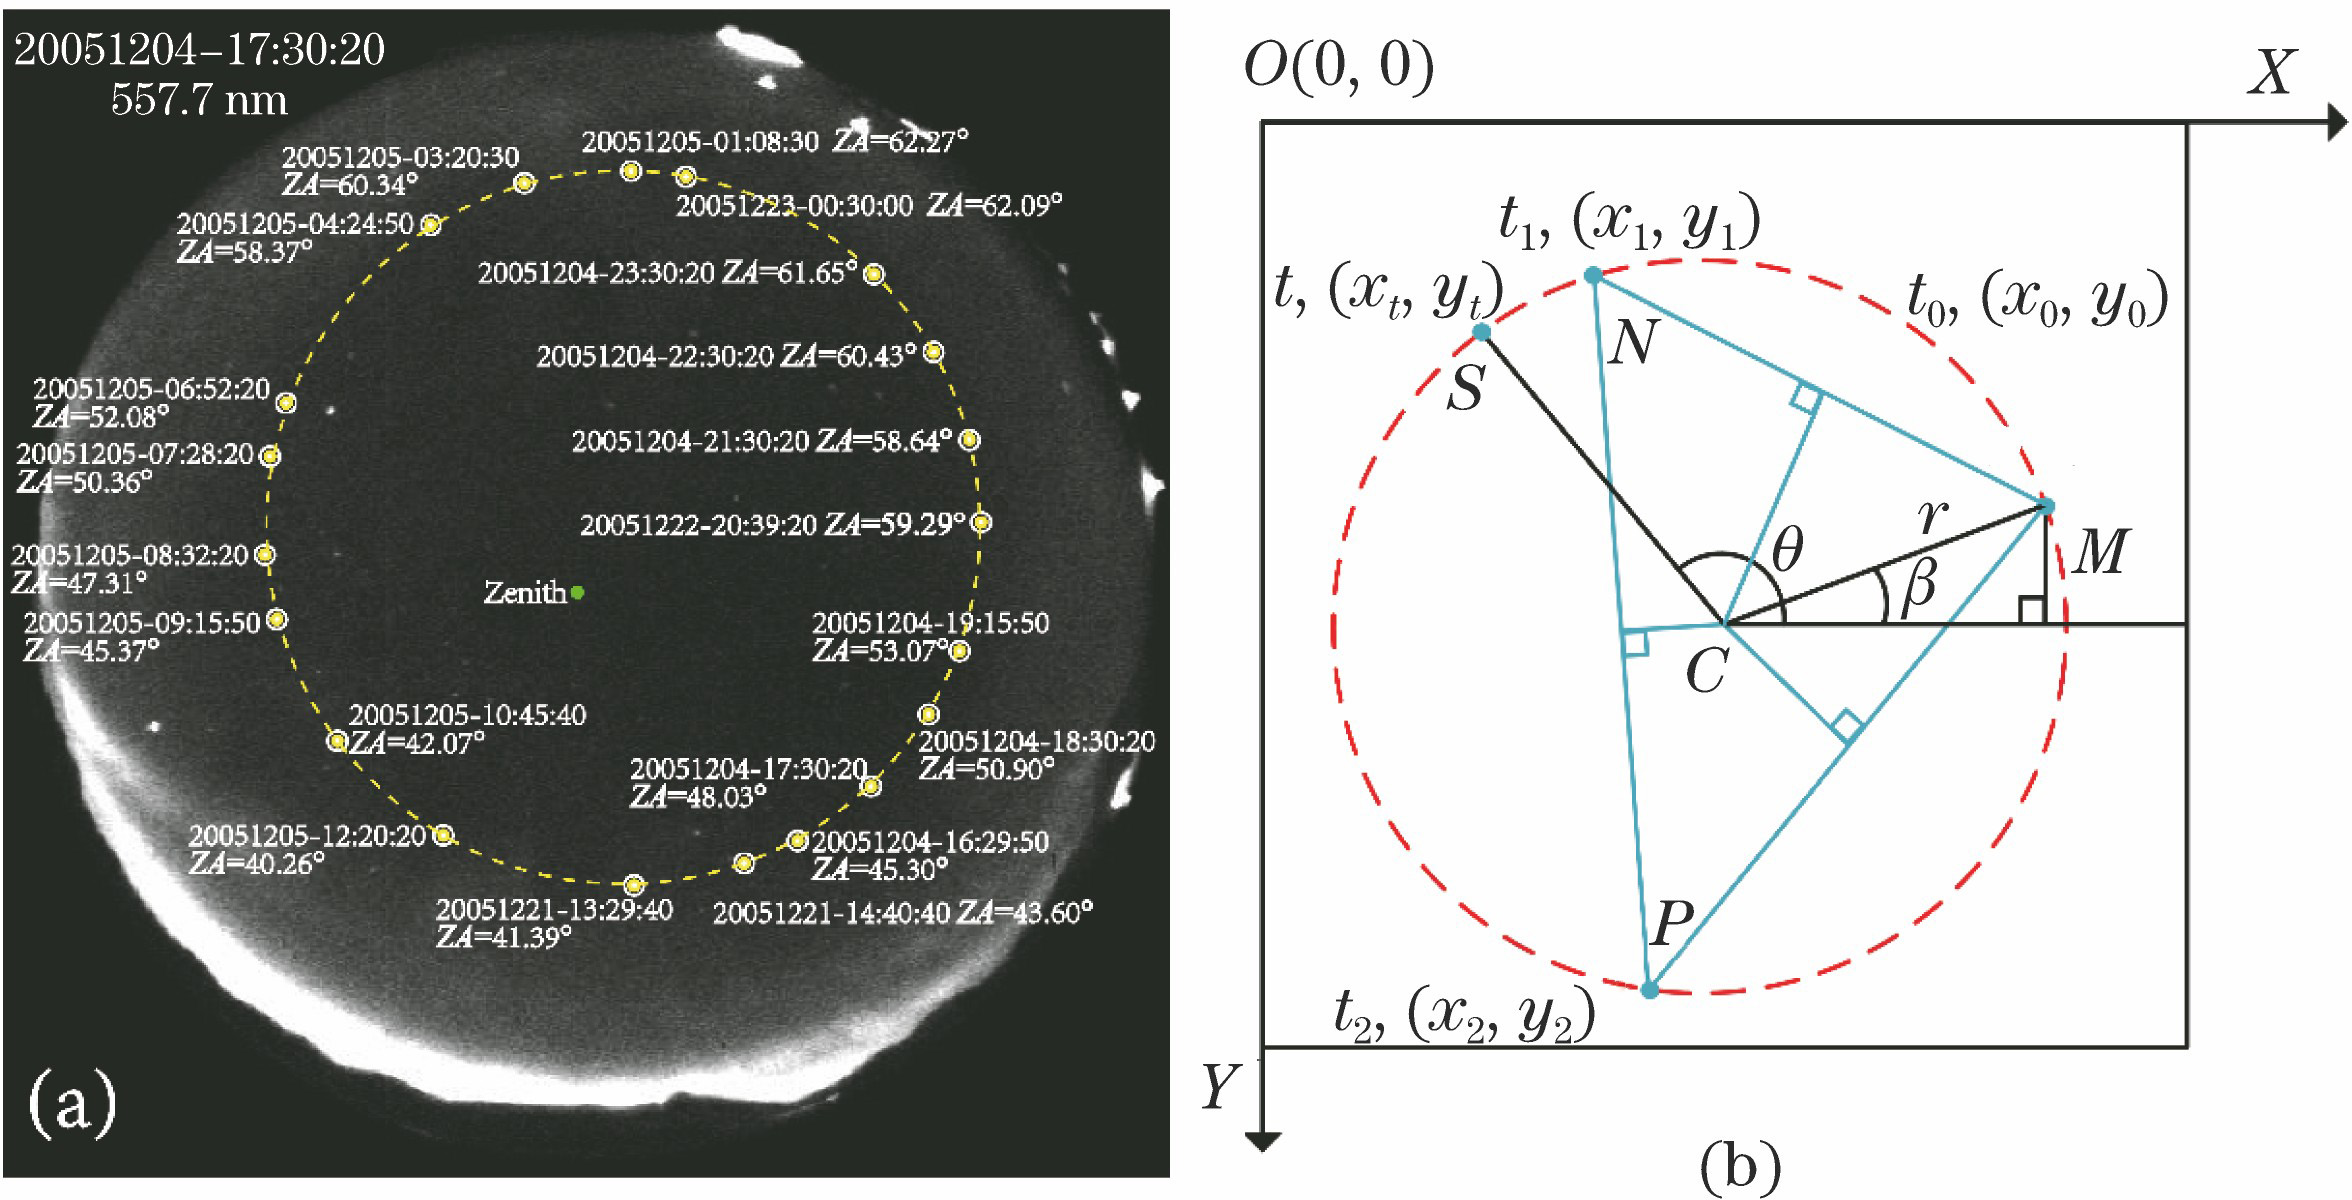 Visual motion track of stars and diagram of calculating stellar coordinates. (a) 24 h visual motion track of Vega; (b) diagram of calculating stellar coordinate in all-sky image